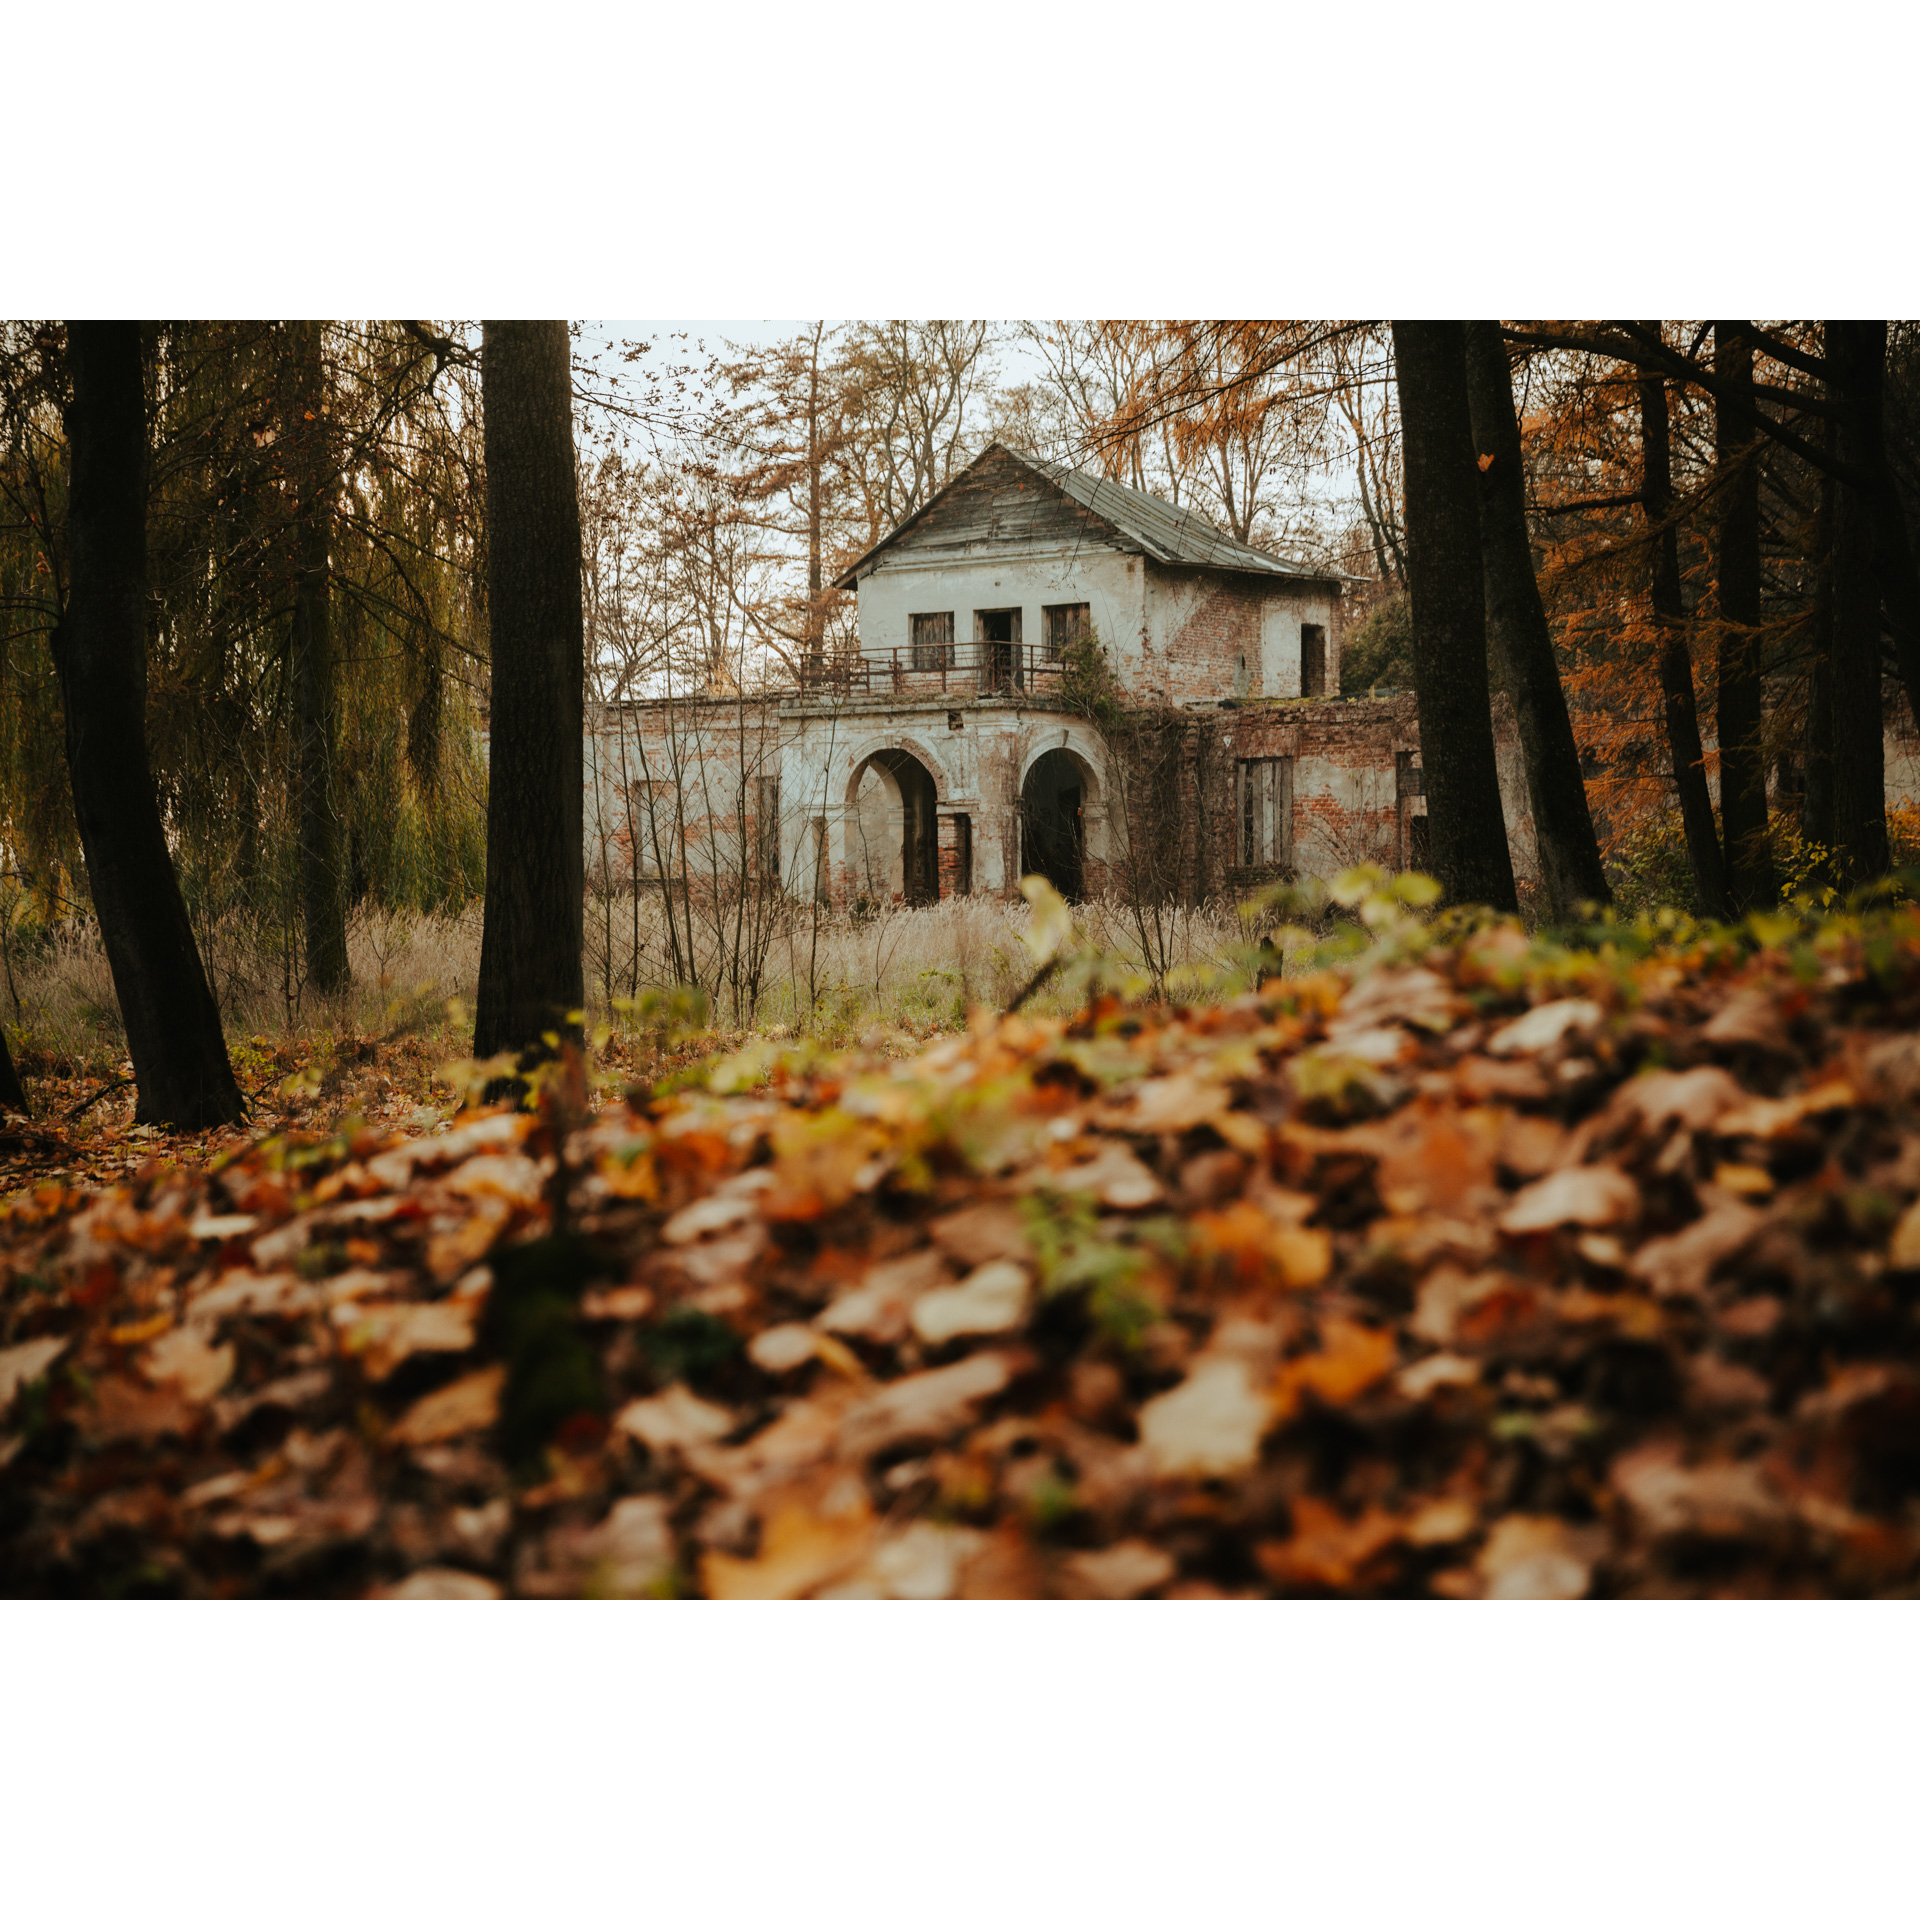 The ruins of the former mansion surrounded by autumn leaves